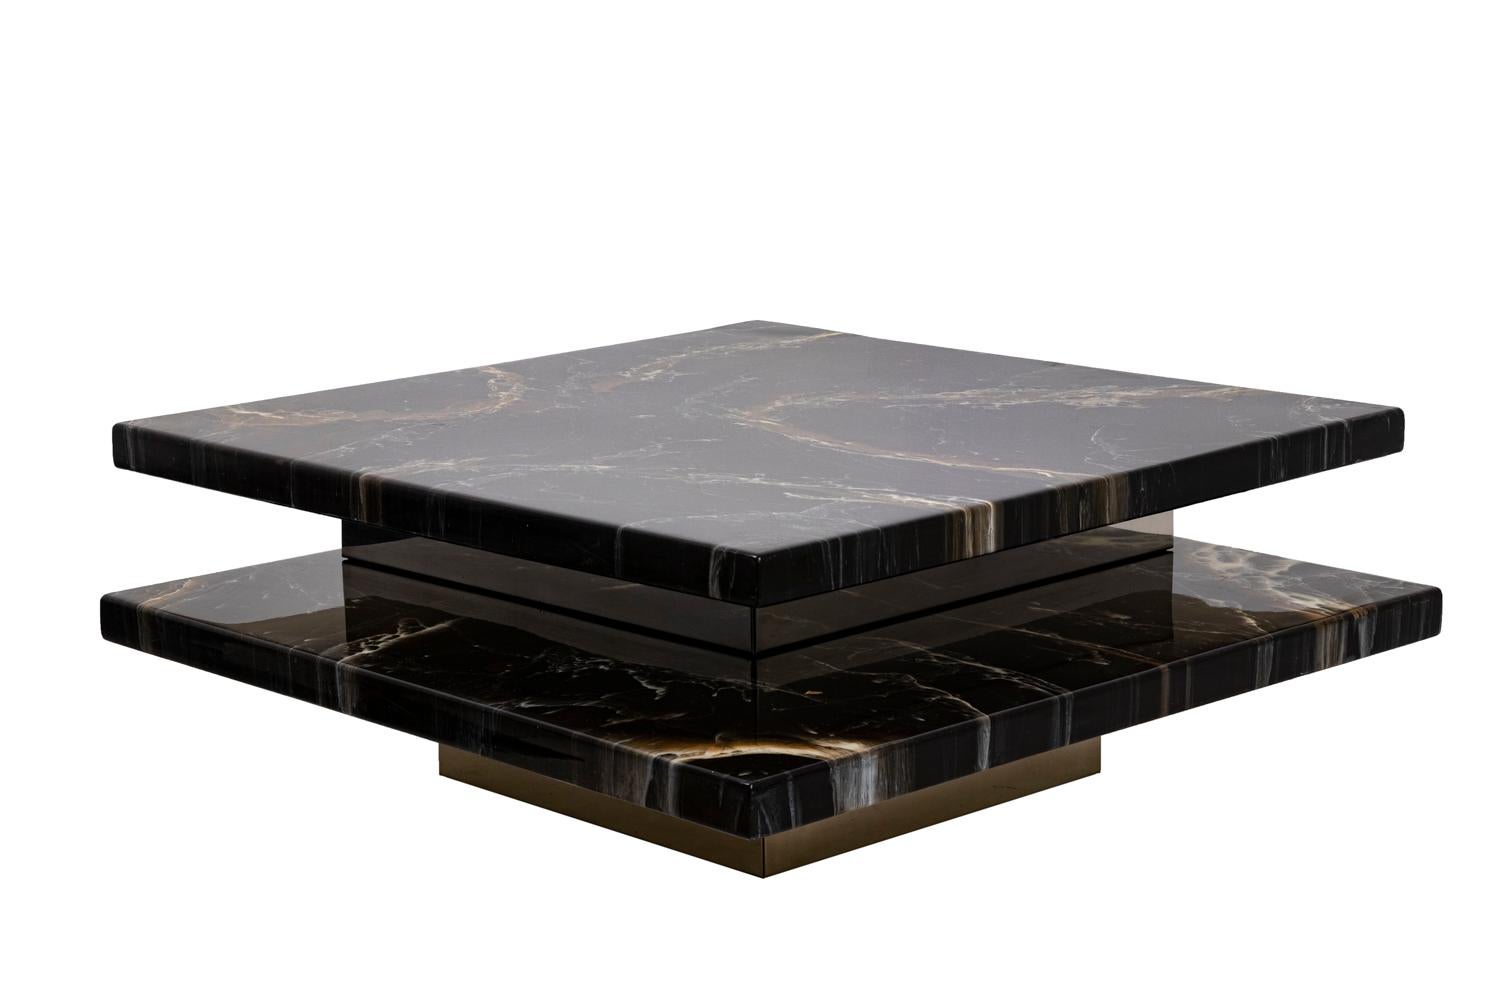 Modular coffee table in Bakelite and chromed metal composed by two square tables with marble imitation Bakelite trays. They stand on square chromed metal bases.

Work realized in the 1980s.

Tray restored.